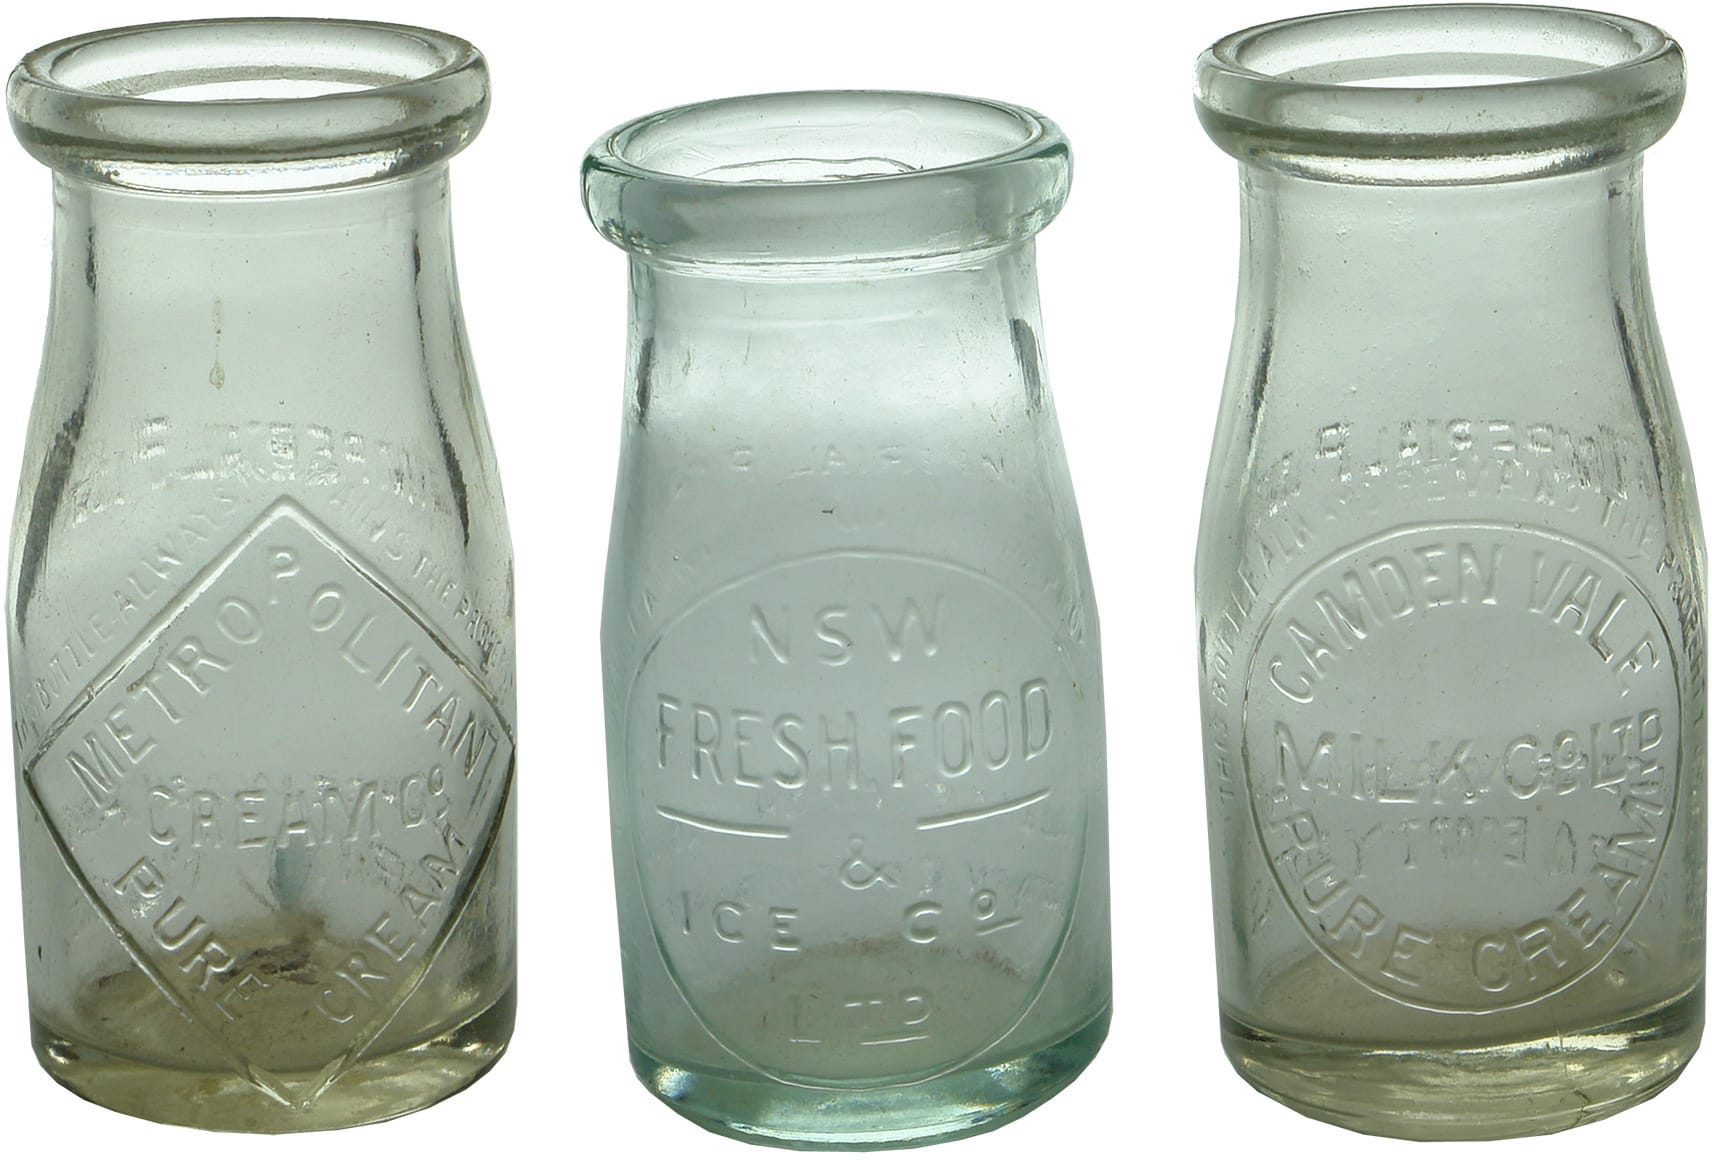 New South Wales Vintage Cream Bottles